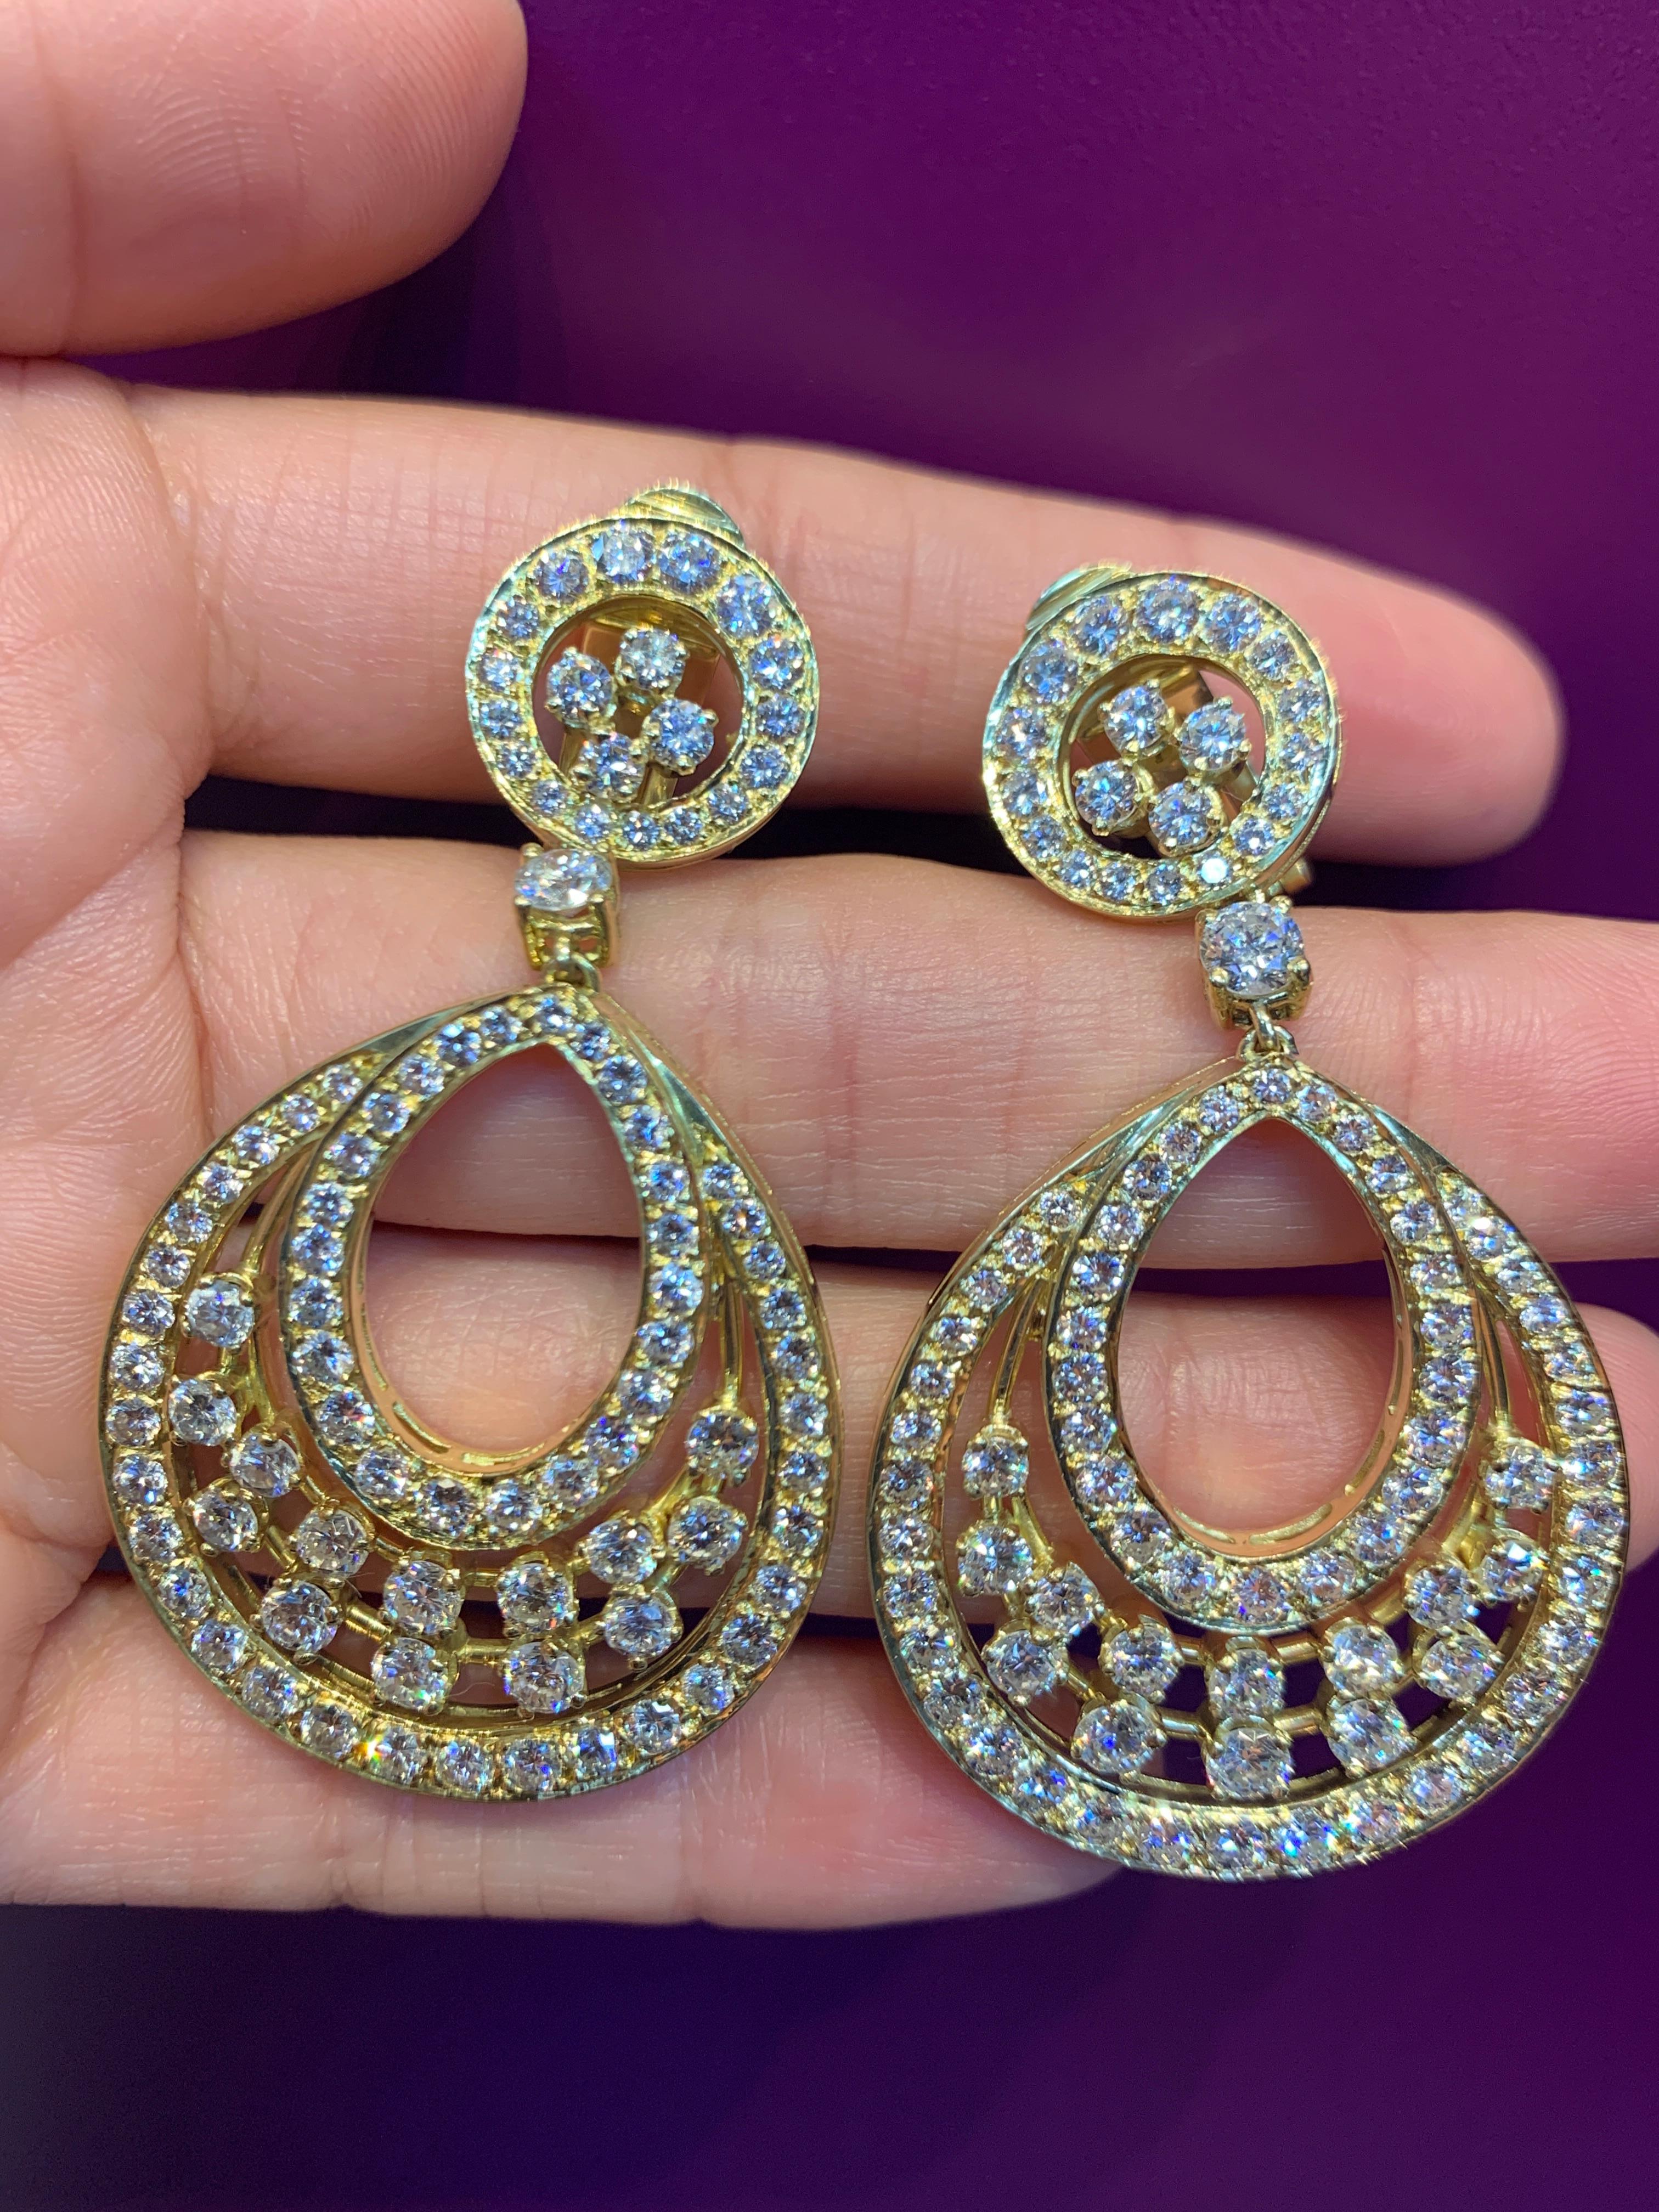 Diamond Door Knocker Dangle Earrings, set in 18K Yellow Gold
180 round cut diamonds approximate Weight: 8.85 Cts
Back Type: Clip On
Measurements: 2